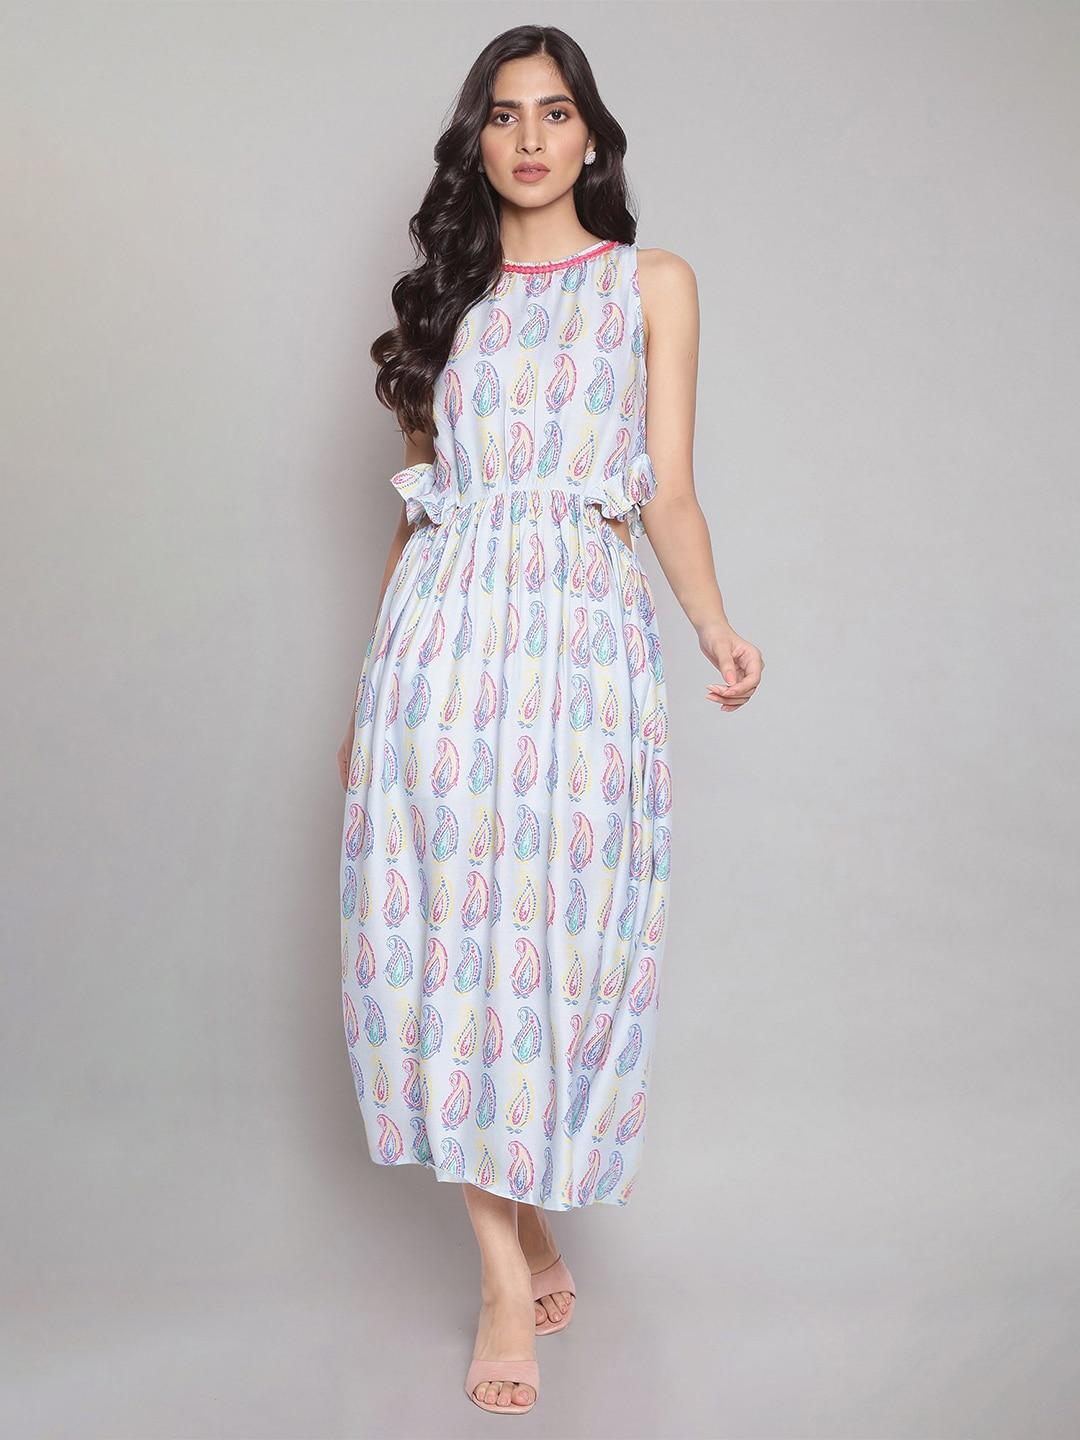 W Blue Floral Omplalodes printed dress with cut-outs waist and gathers.